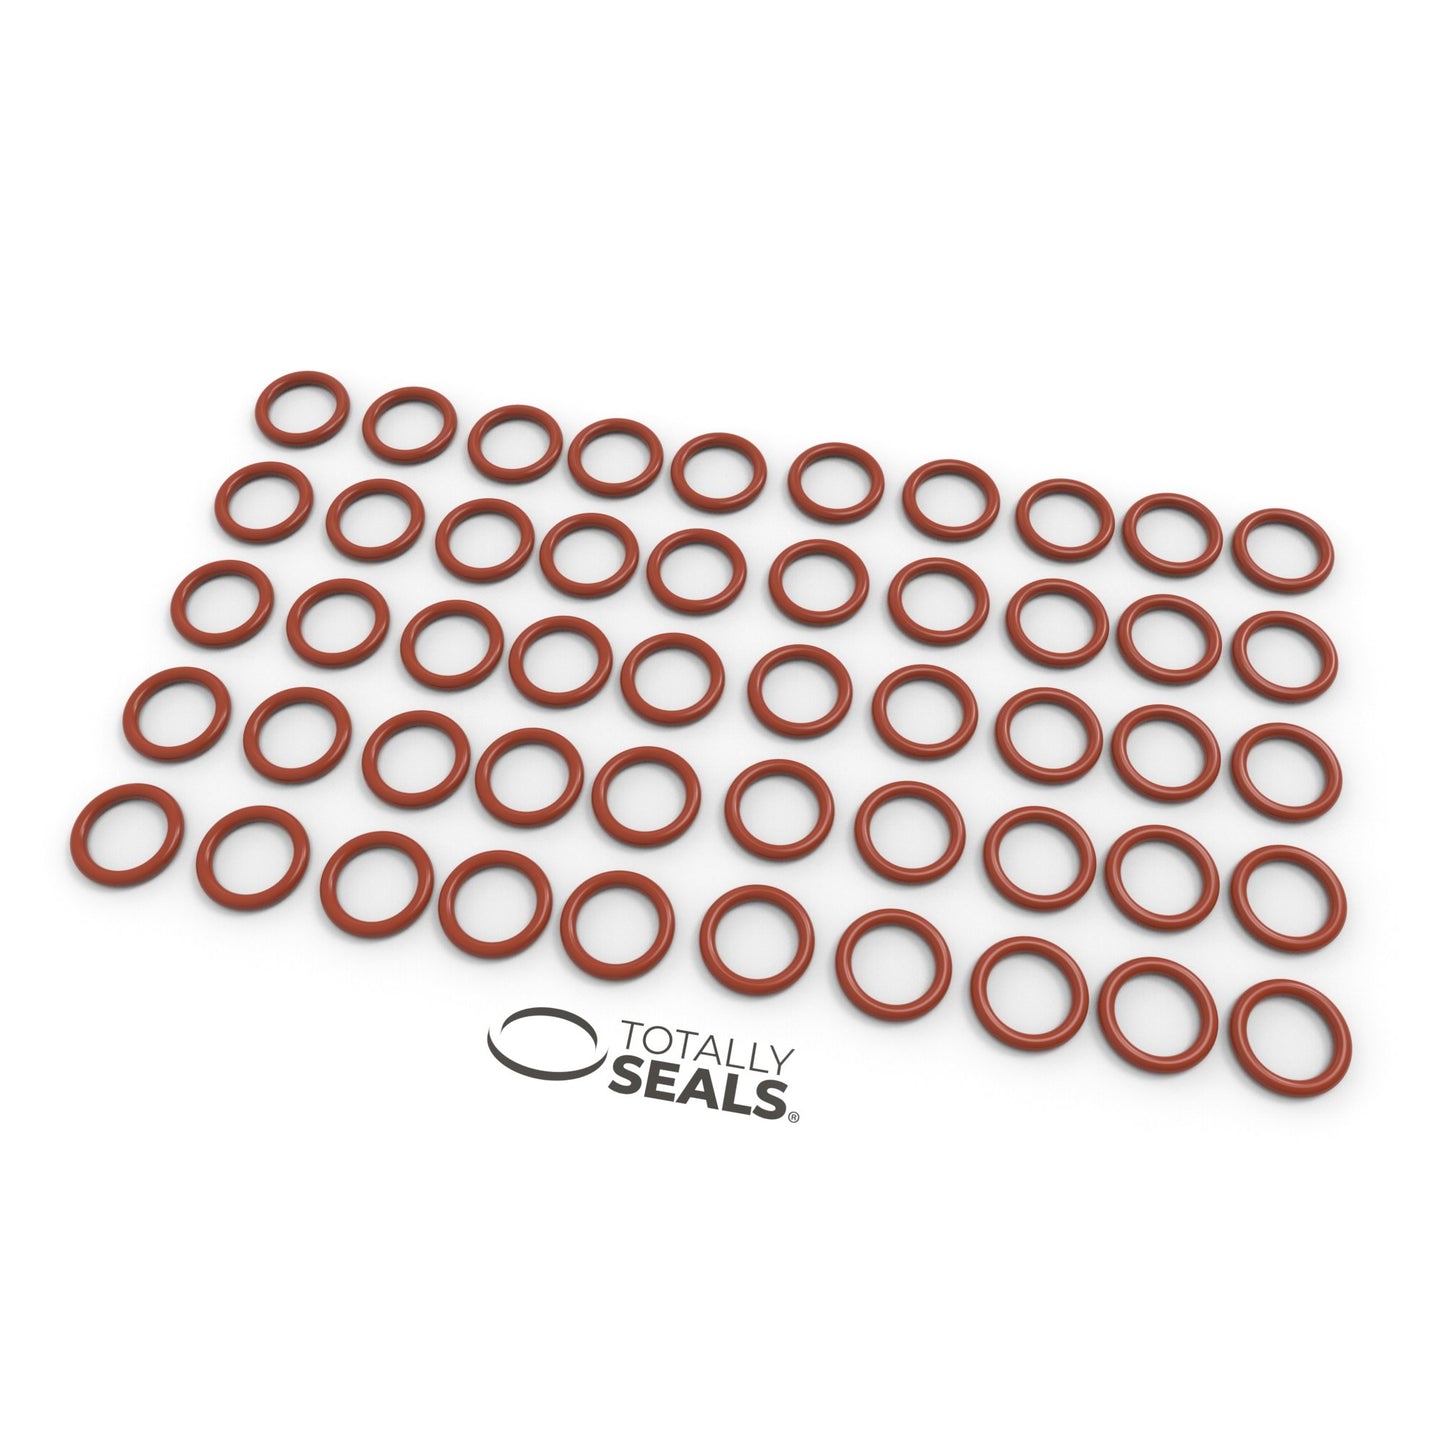 19mm x 2mm (23mm OD) Silicone O-Rings - Totally Seals®